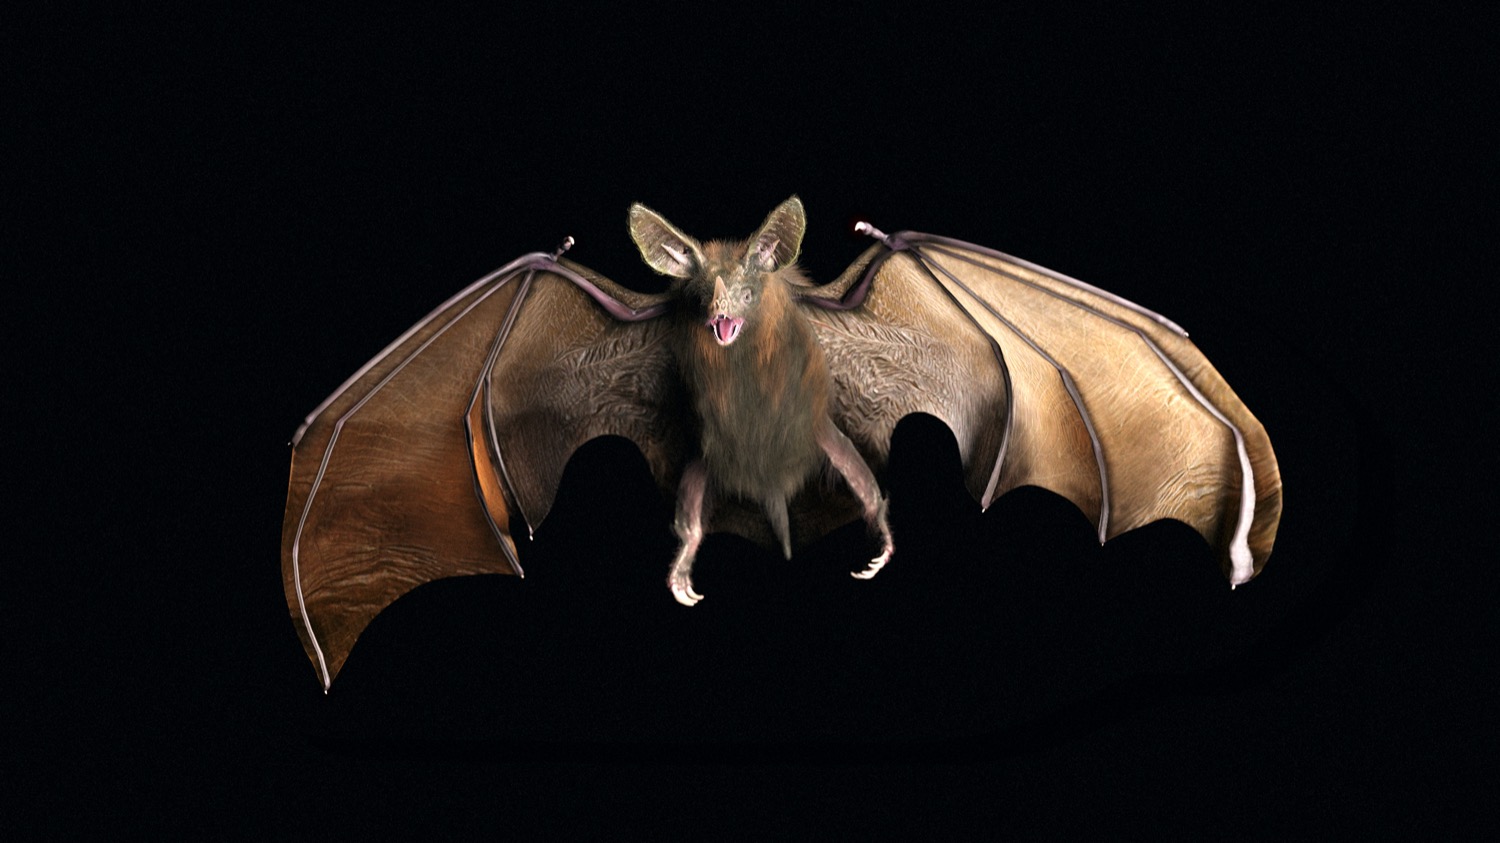 a bat photographer flying midair, its wings spread